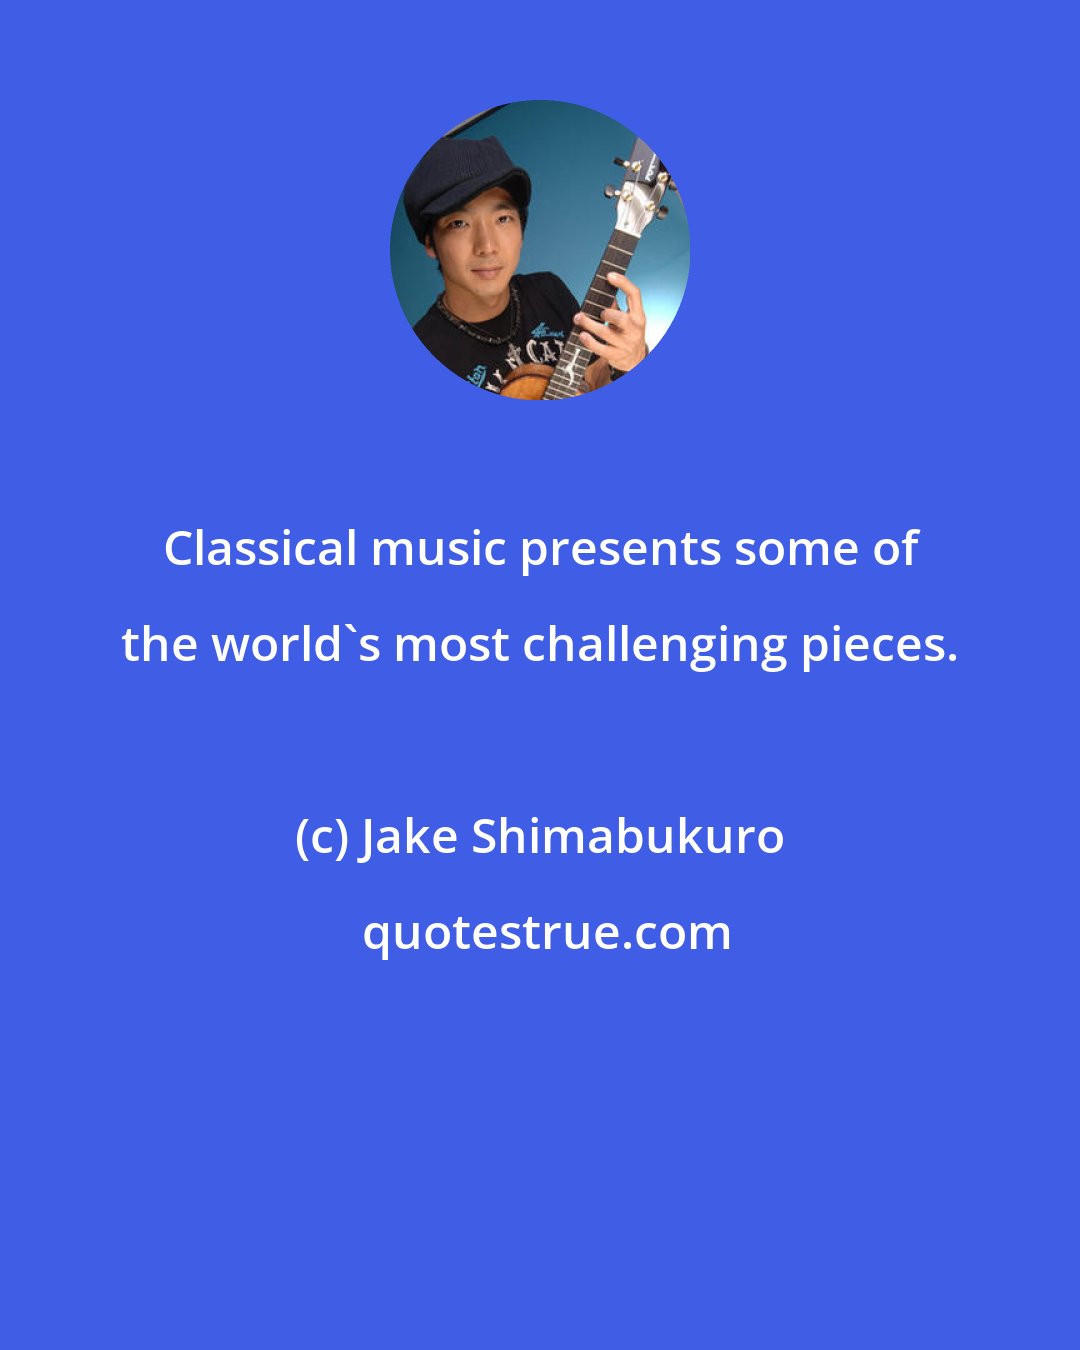 Jake Shimabukuro: Classical music presents some of the world's most challenging pieces.